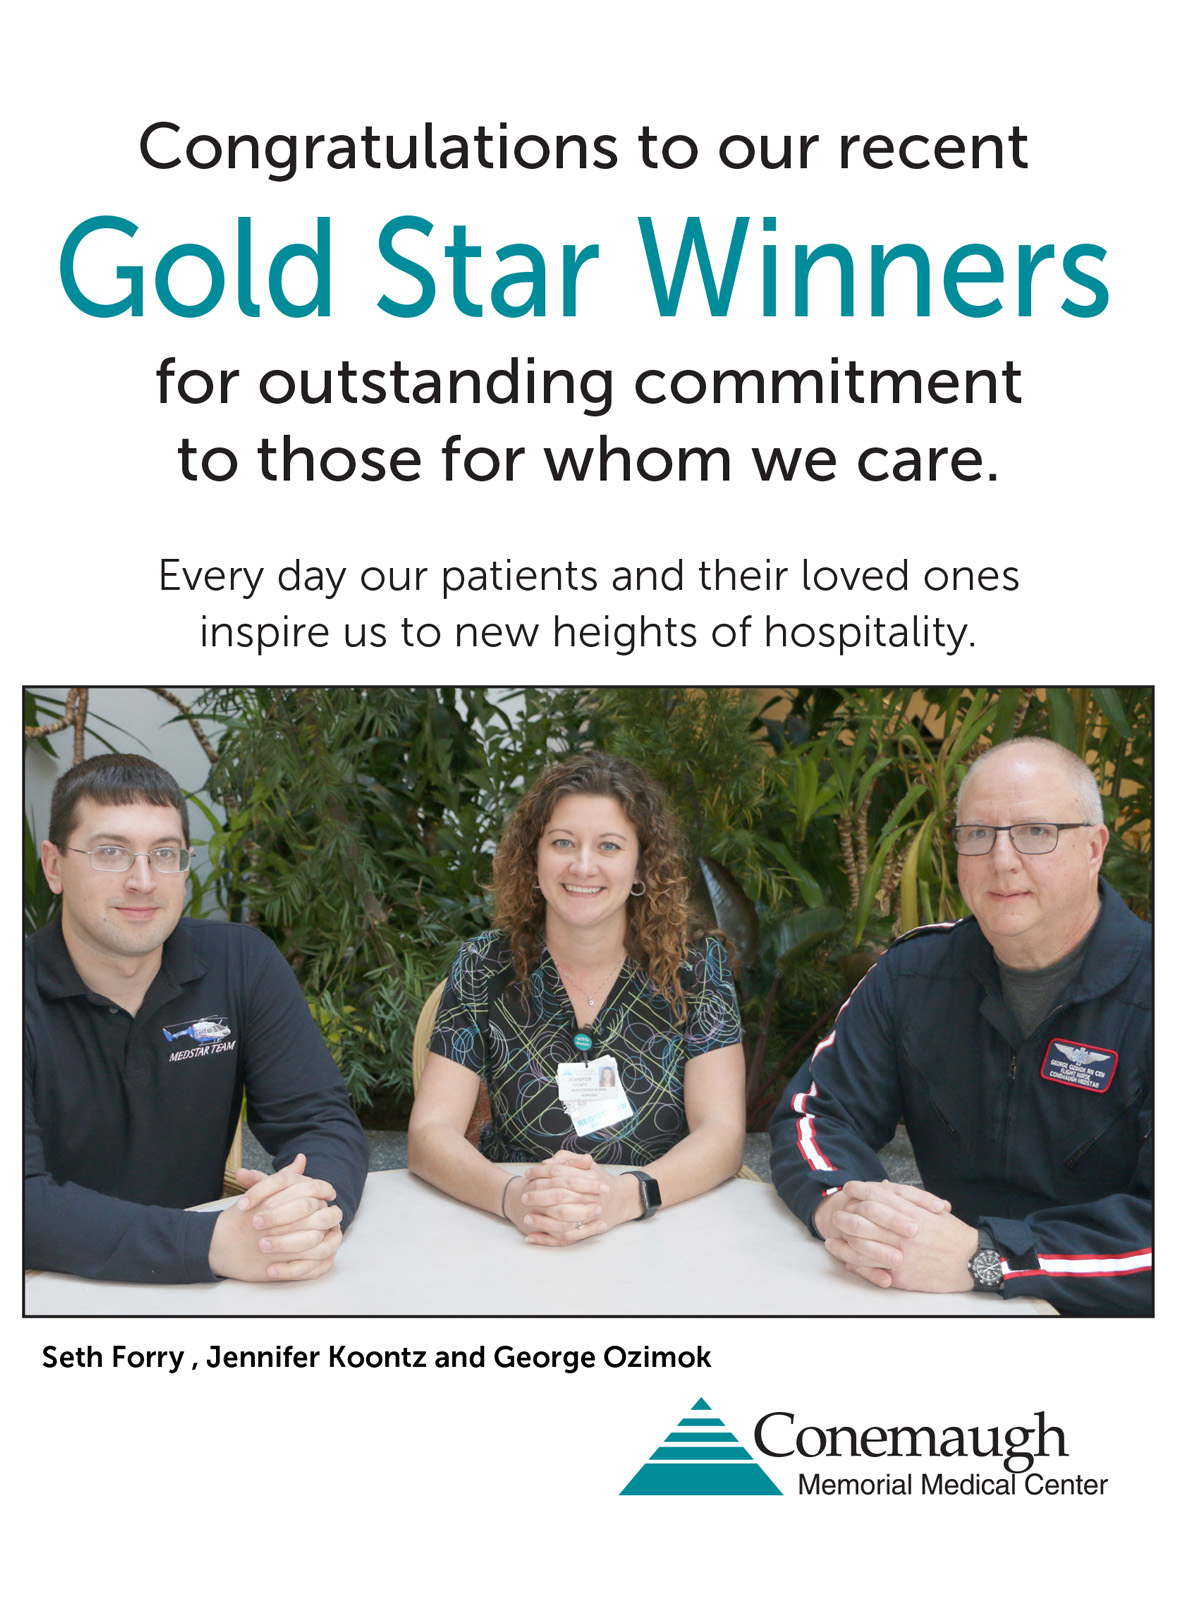 Congratulations to our recent Gold Star Winners for outstanding commitment to those for whom we care. Every day our patients and their loved ones inspire us to new heights of hospitality. Seth Forry, Jennifer Koontz and George Ozimok